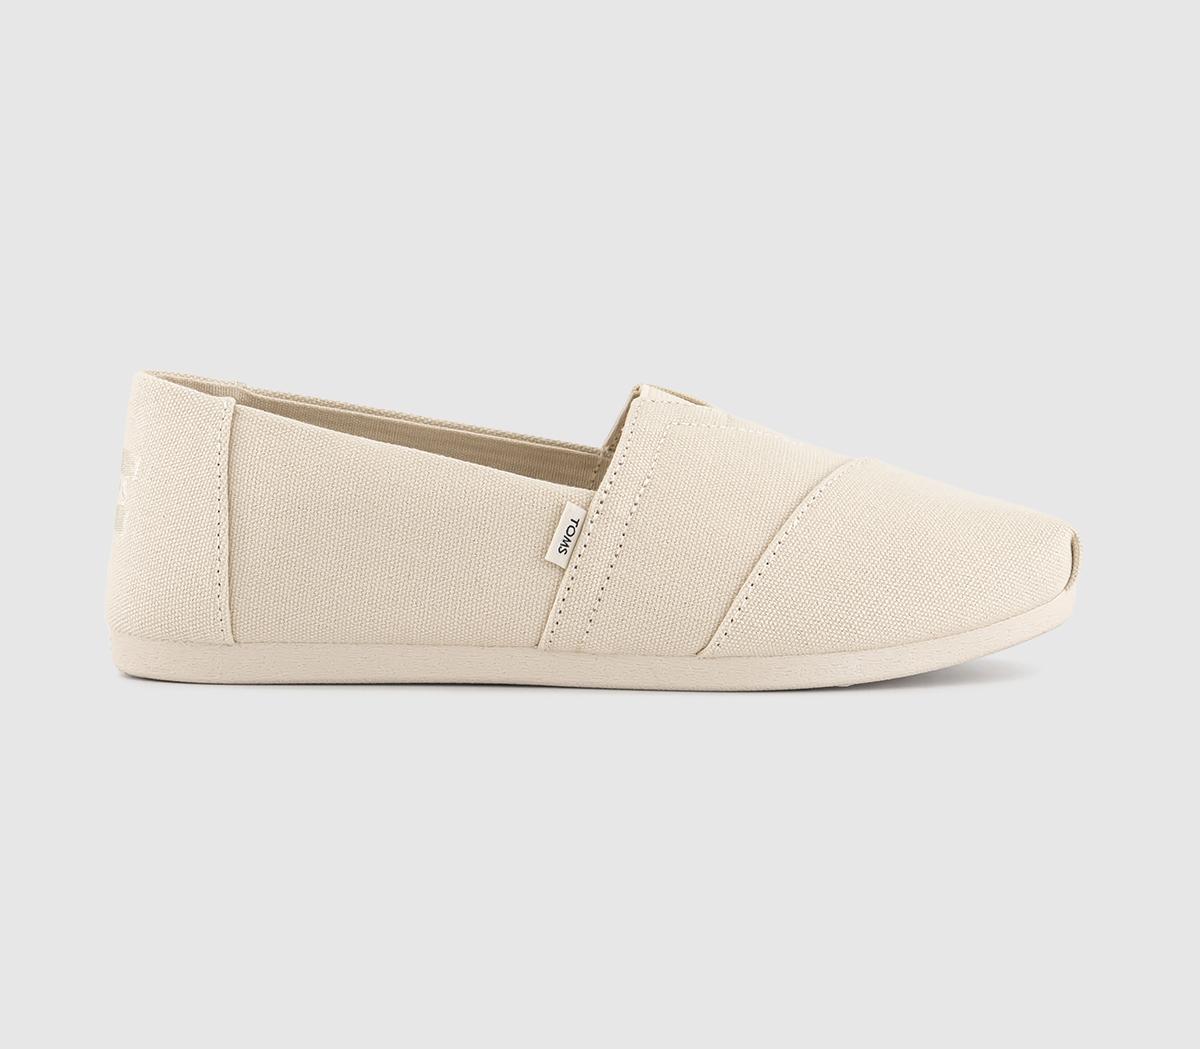 TOMSToms Classic Alpargata Slip OnsIvory Recycled Cotton Canvas